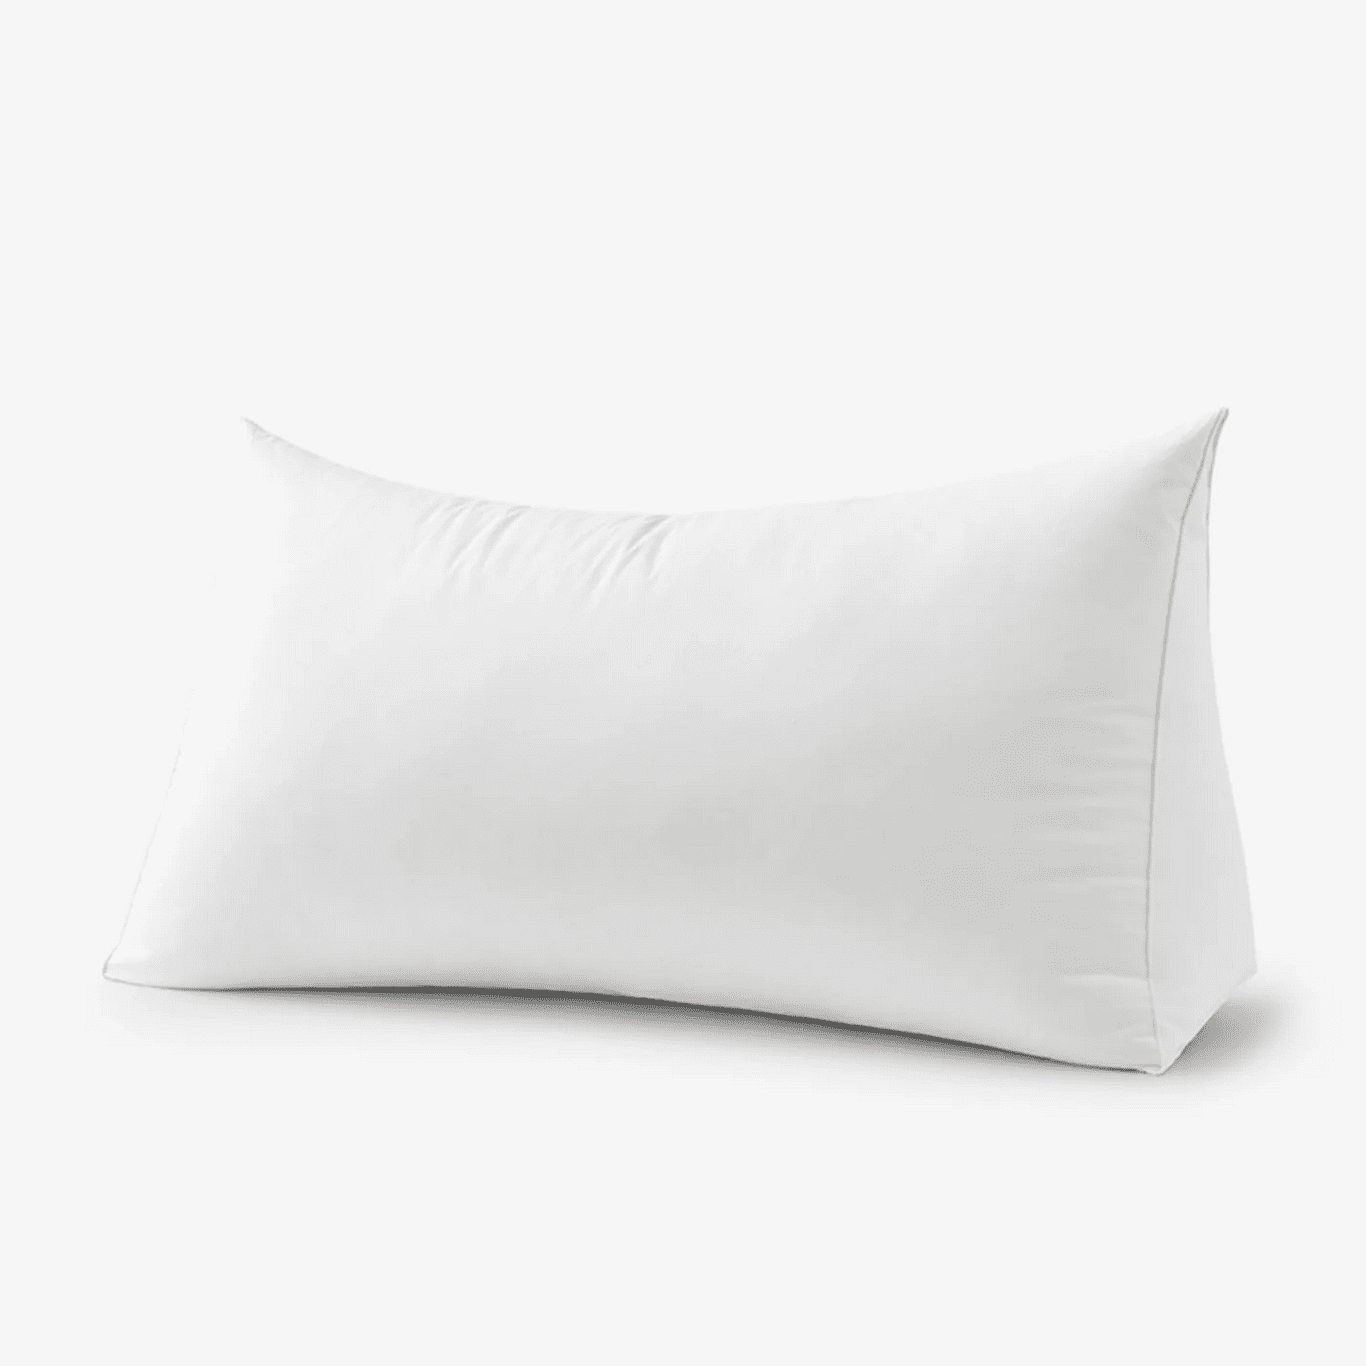 https://media.sleepdoctor.com/images/f_auto,q_auto:eco/v1685743093/thesleepdoctor-com/The-Company-Store-Company-Essentials-Feather-and-Down-Reading-Wedge-Pillow-Insert/The-Company-Store-Company-Essentials-Feather-and-Down-Reading-Wedge-Pillow-Insert.png?_i=AA